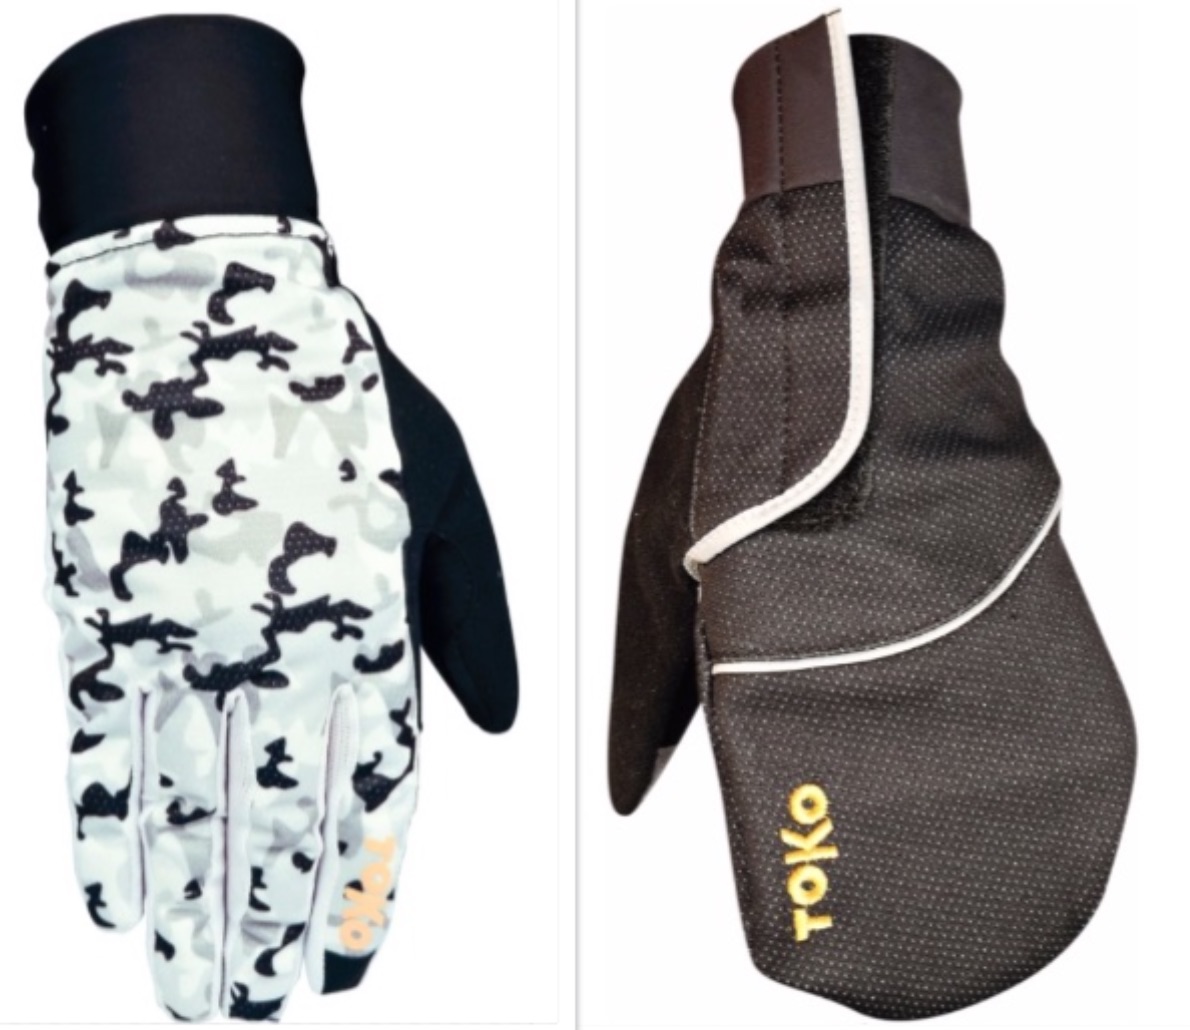 Toko Profi Gloves (l) and Racing Overmitts (r), FBD pick for $30-100